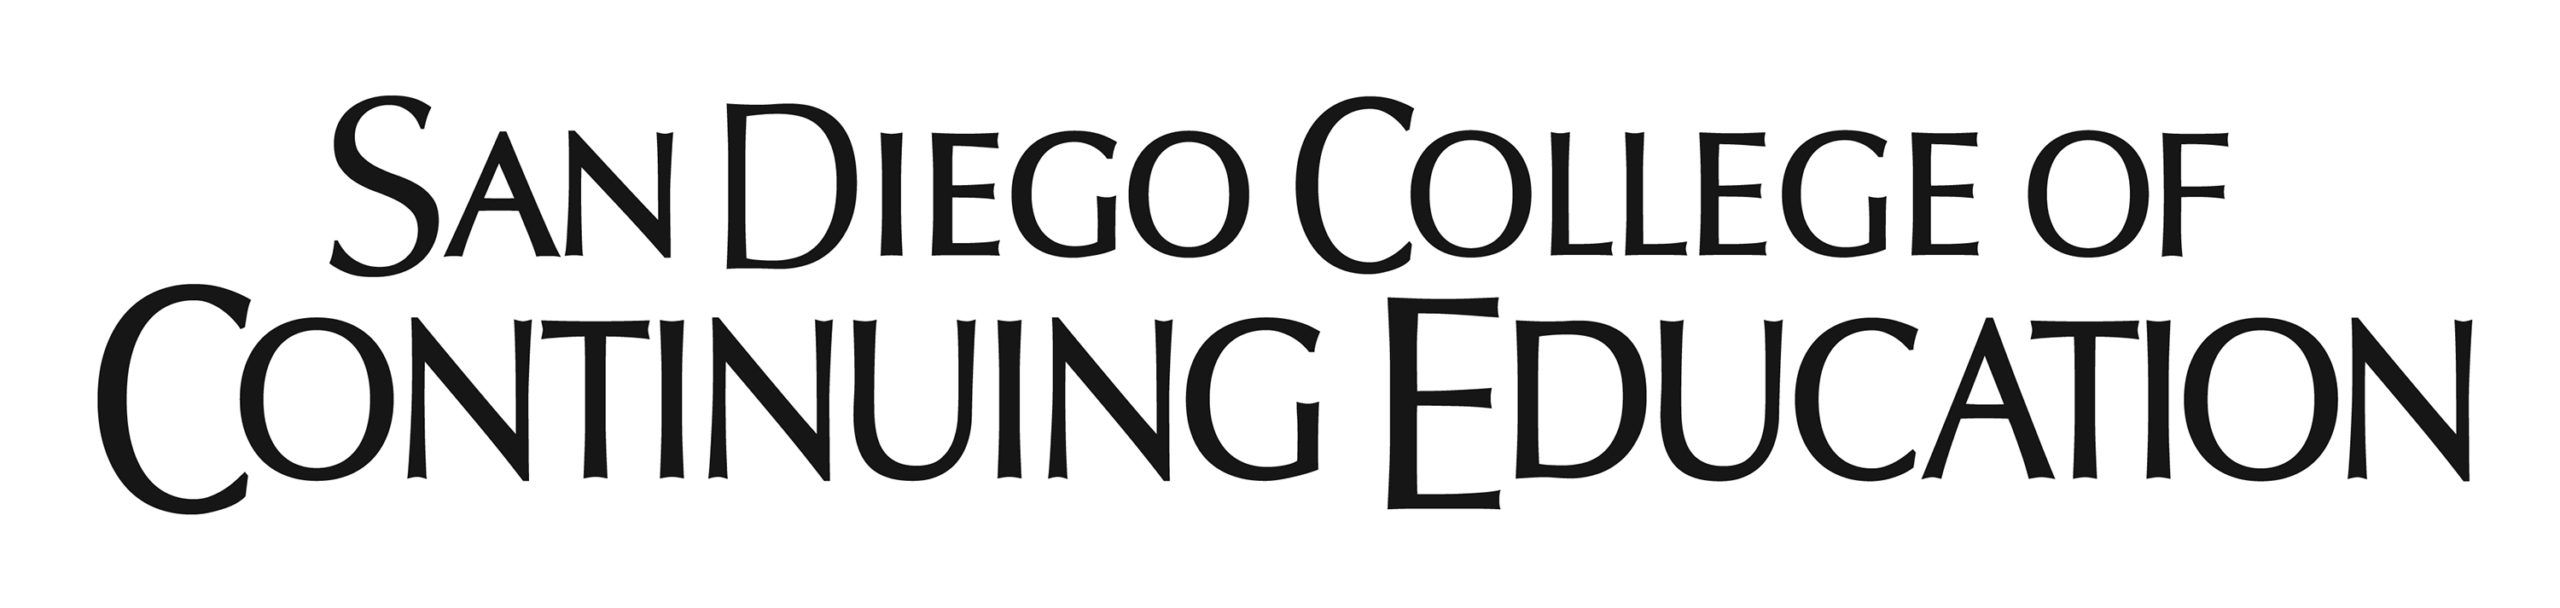 San Diego college of continuing education SDCCE